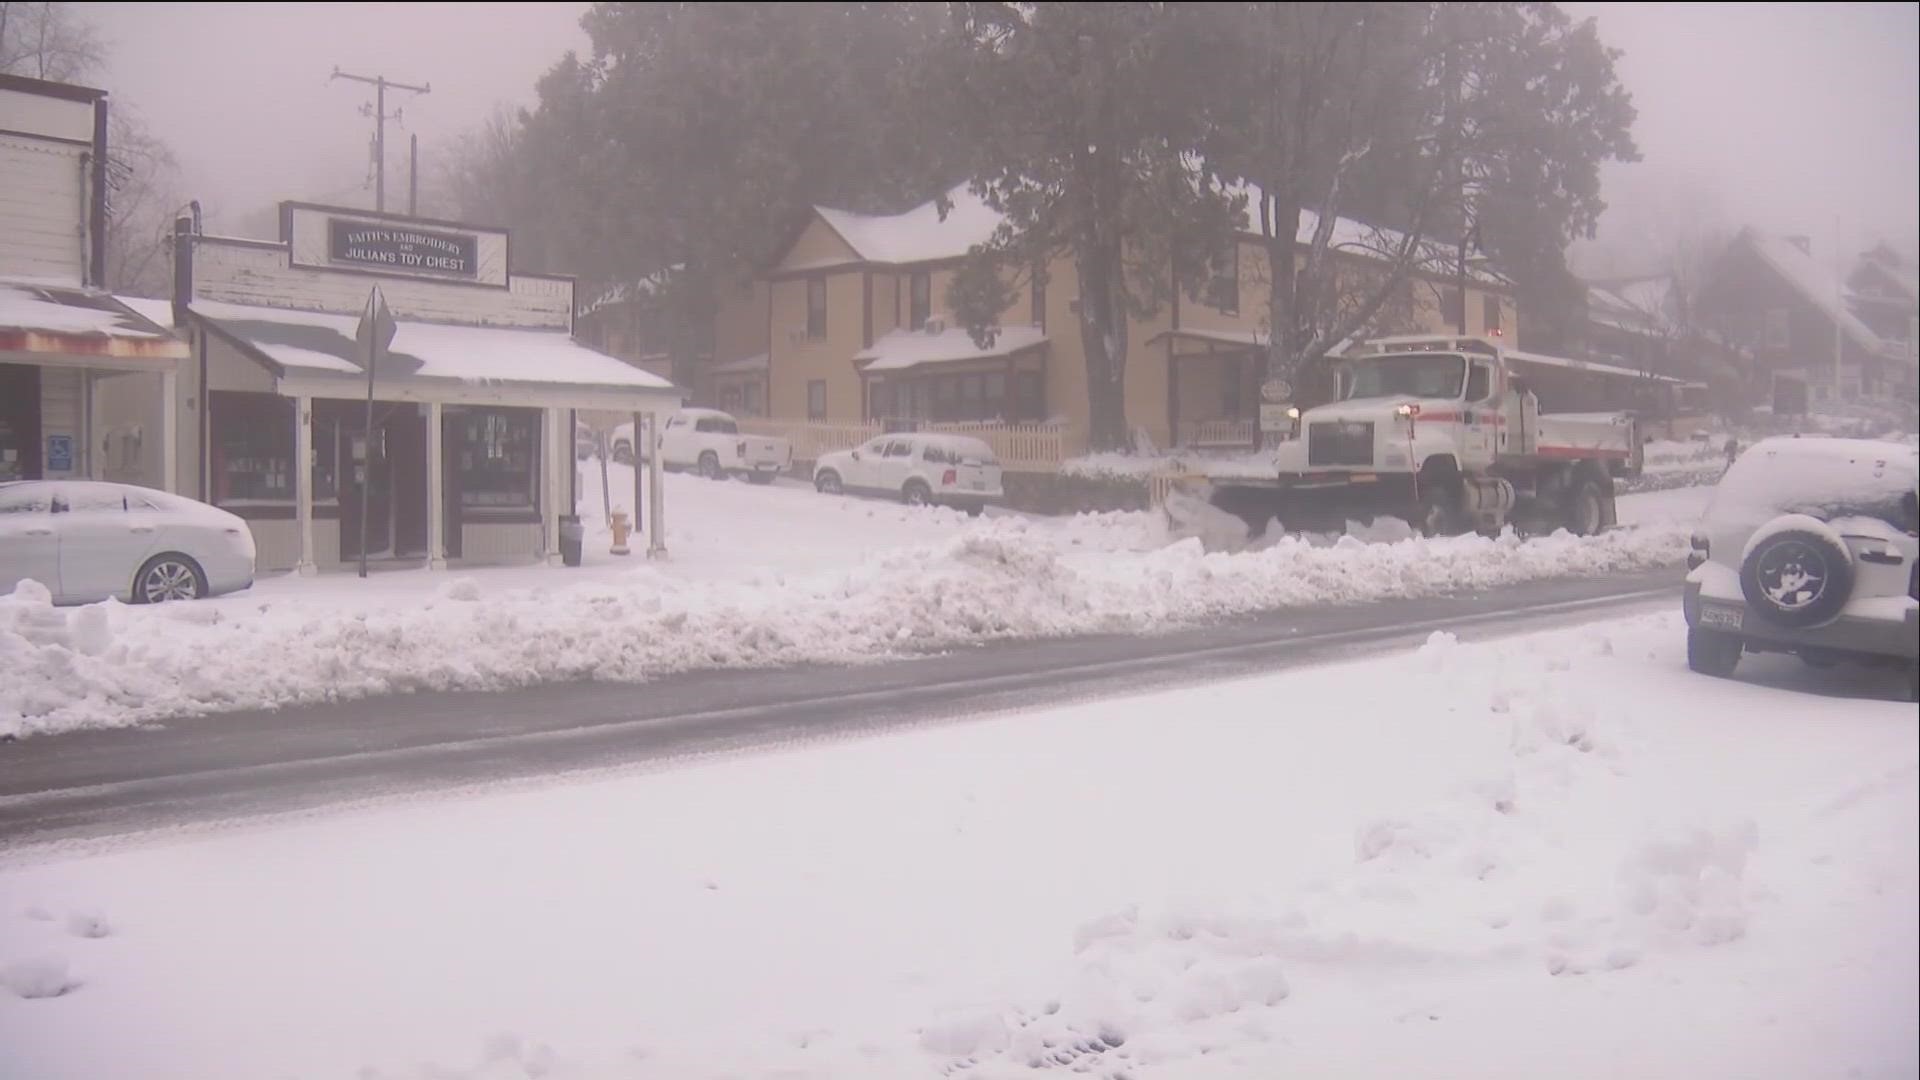 San Diego winter storm brings torrential rain and mountain snow